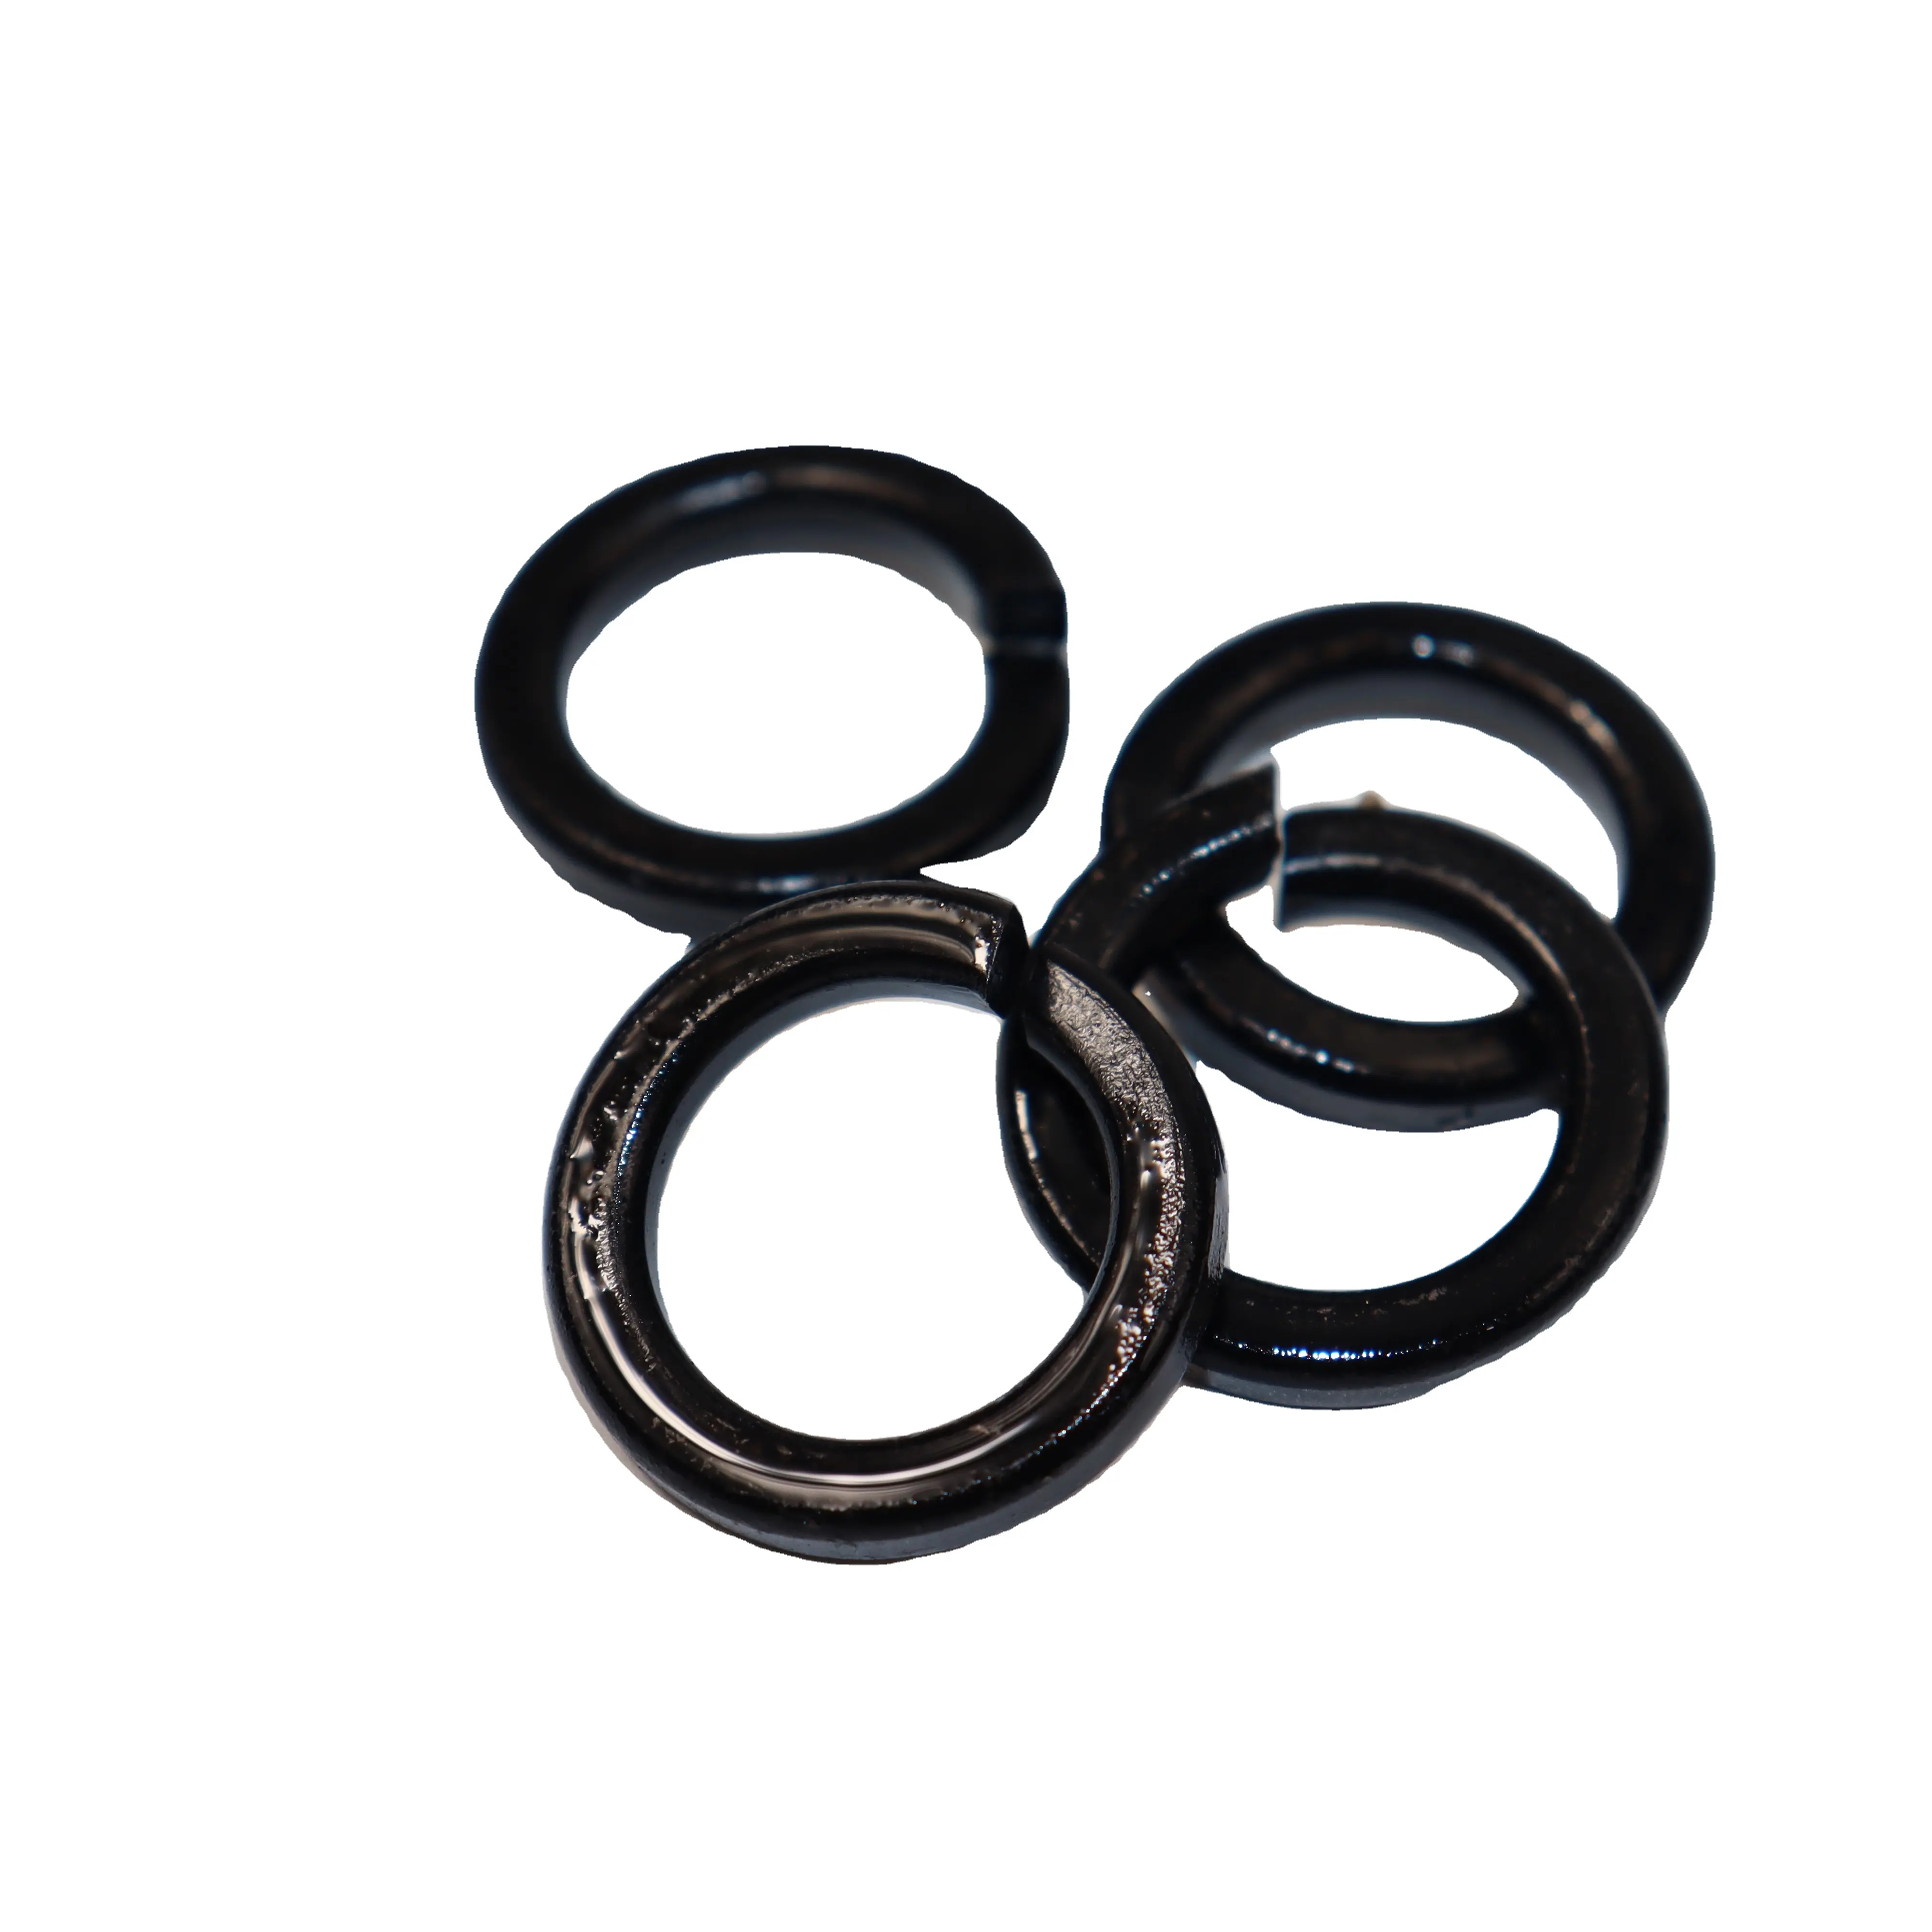 DIN 127 spring washers are used to prevent nut loosening High quality spring steel carbon steel galvanized colored